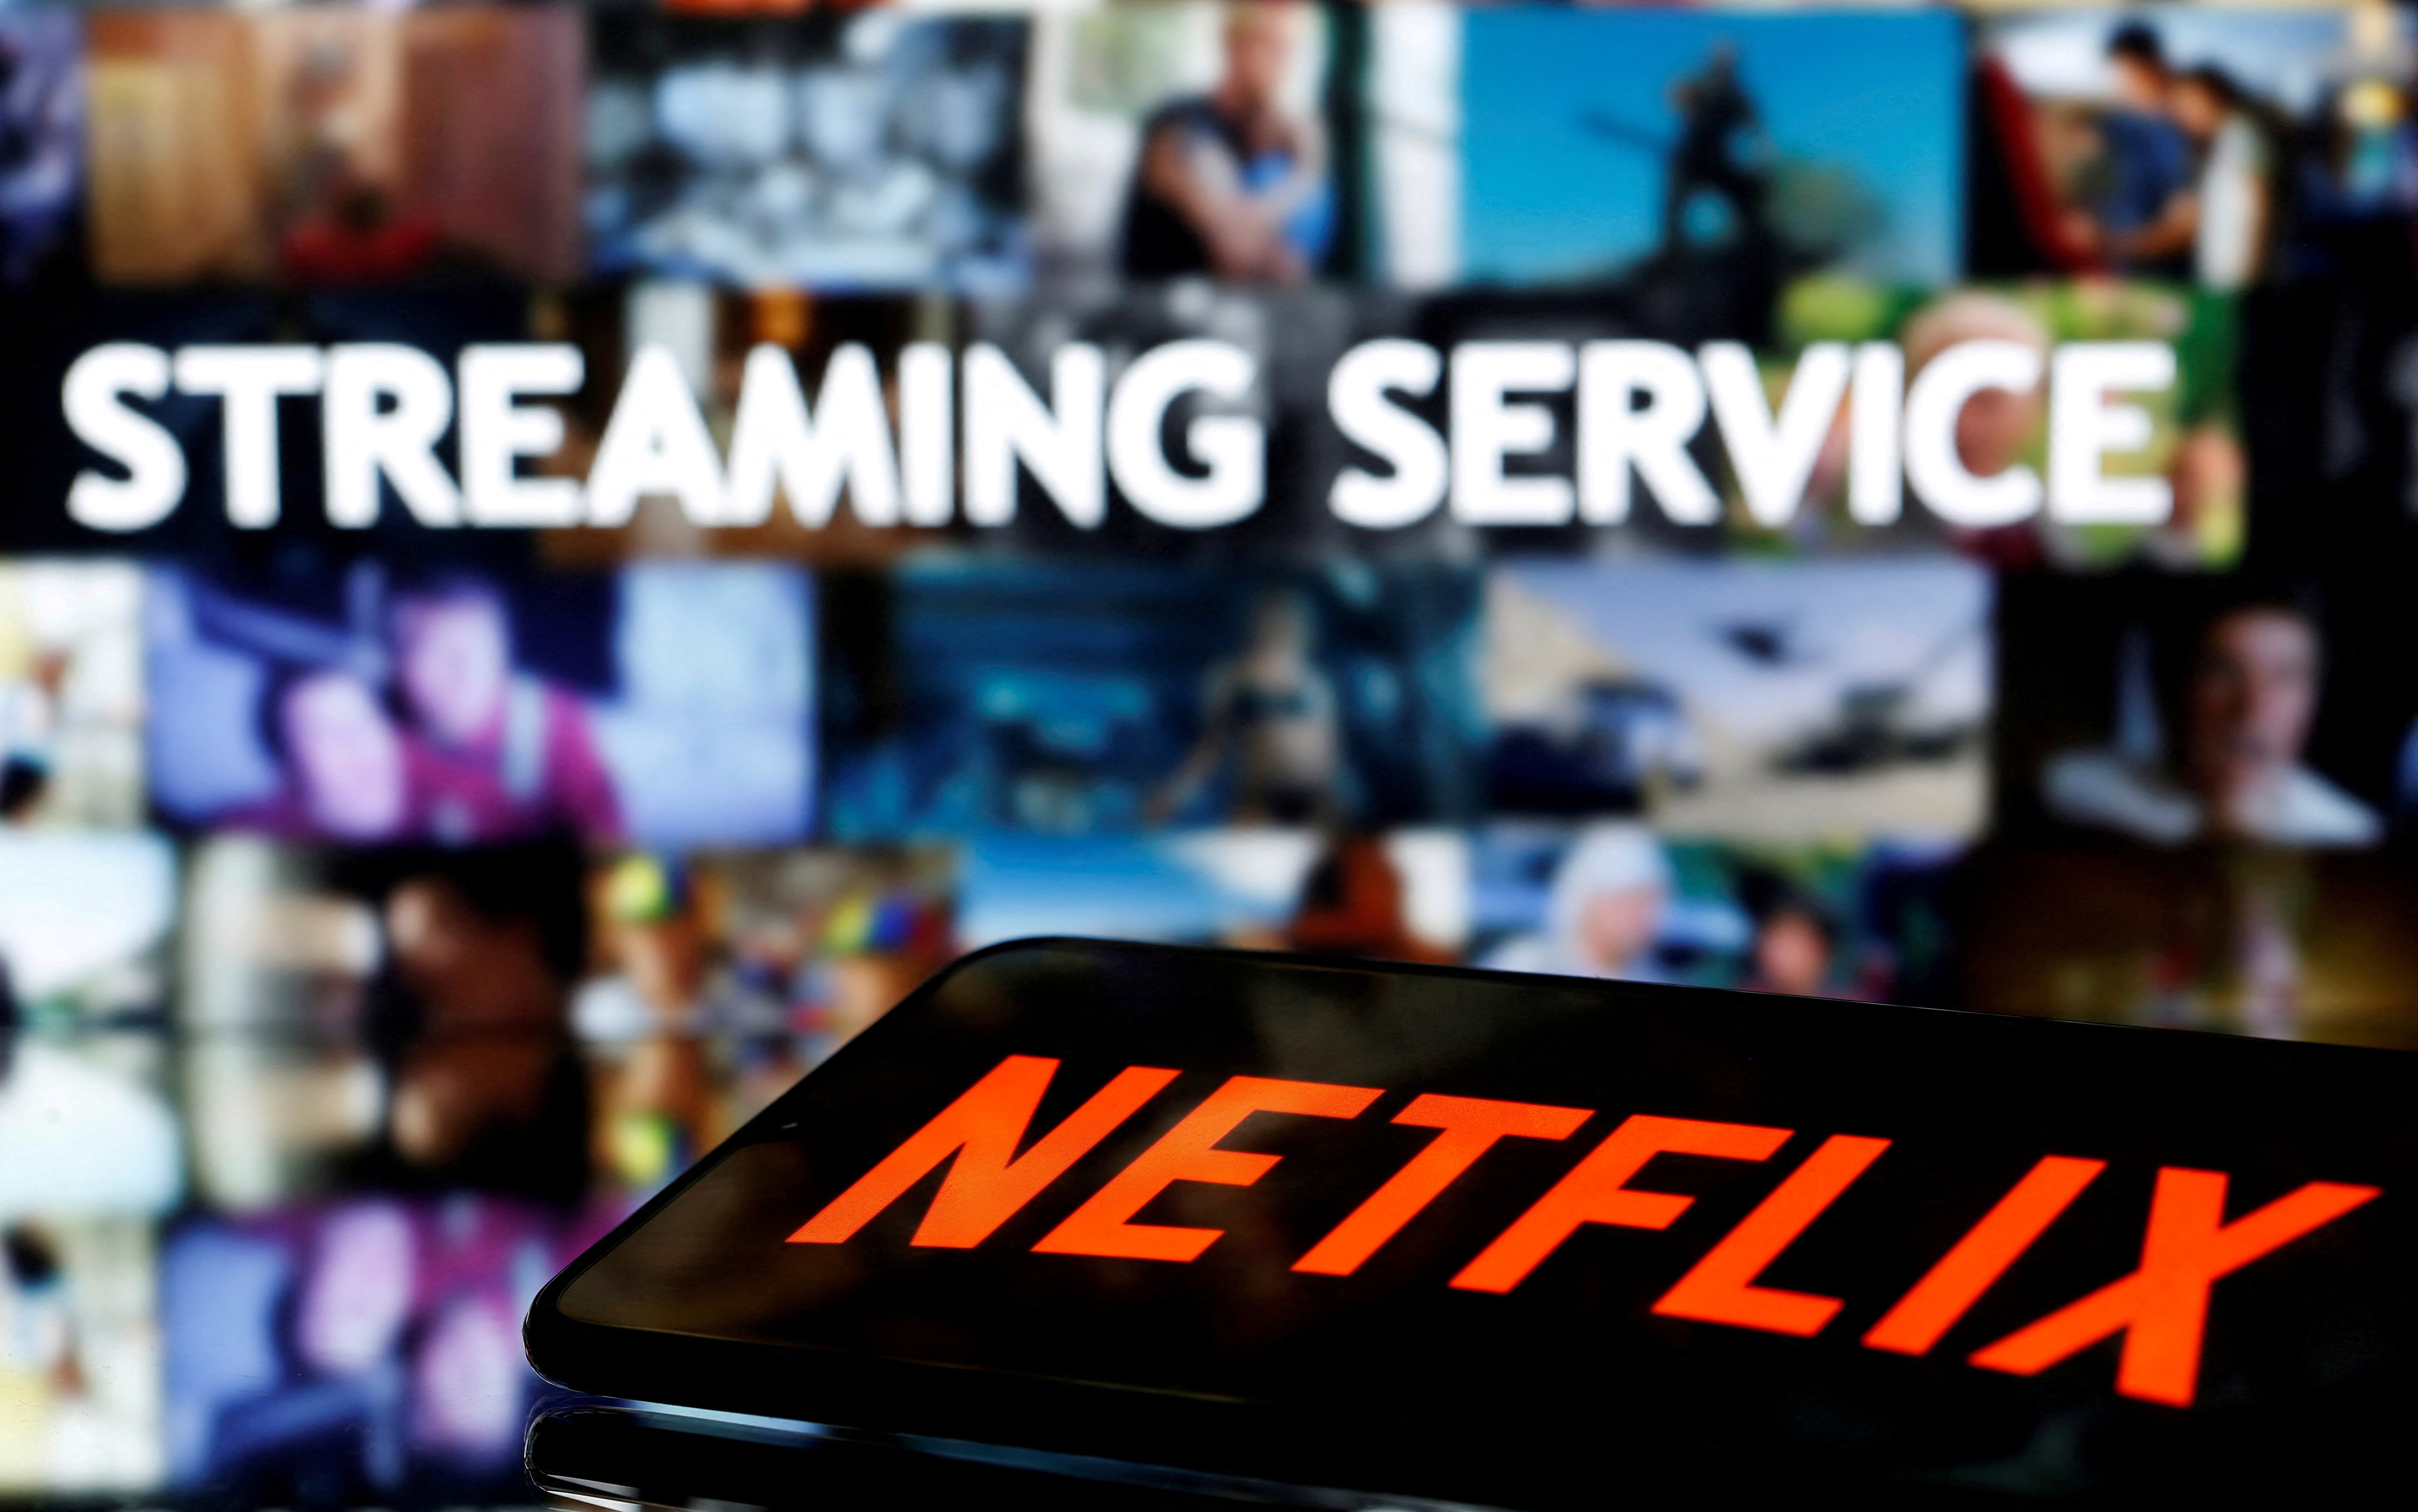 A smartphone with the Netflix logo lies in front of displayed "Streaming service" words in this illustration